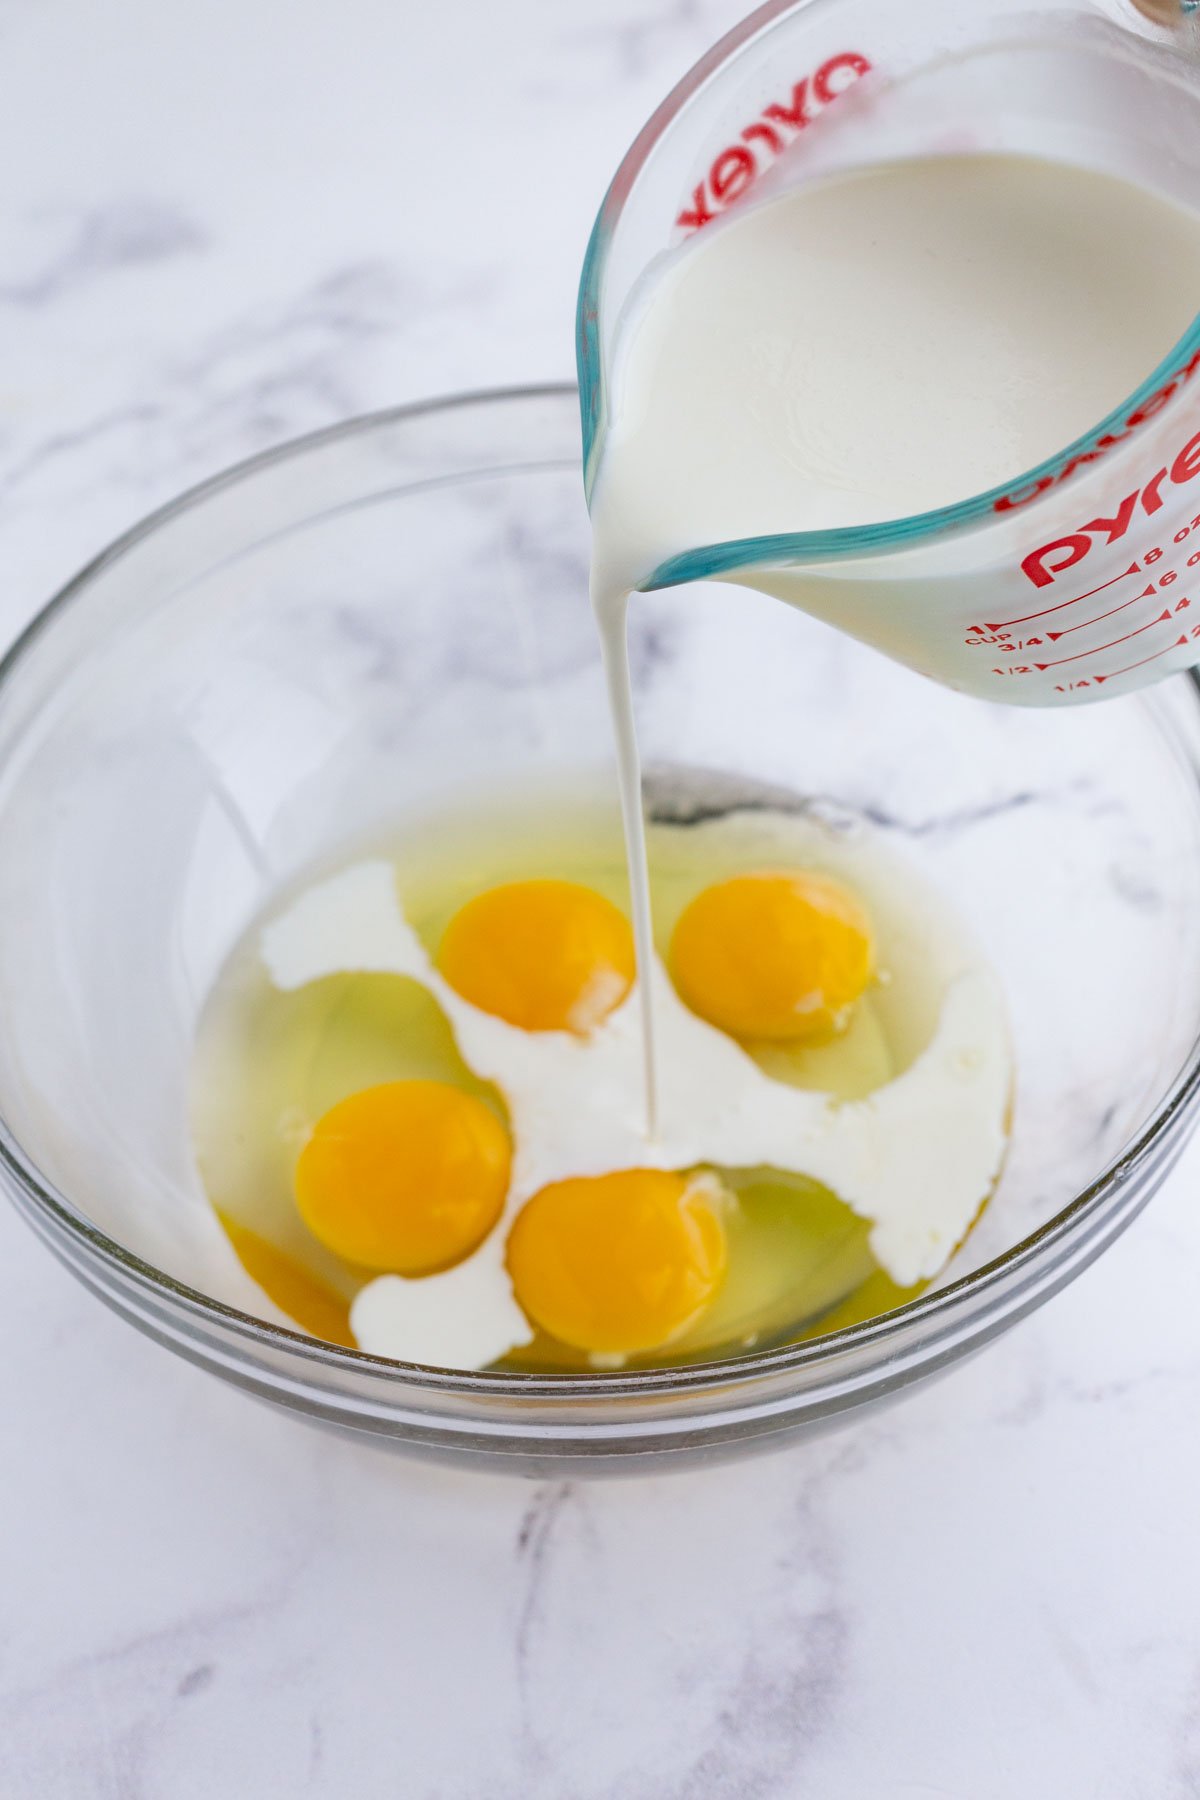 Cream is added to the eggs.